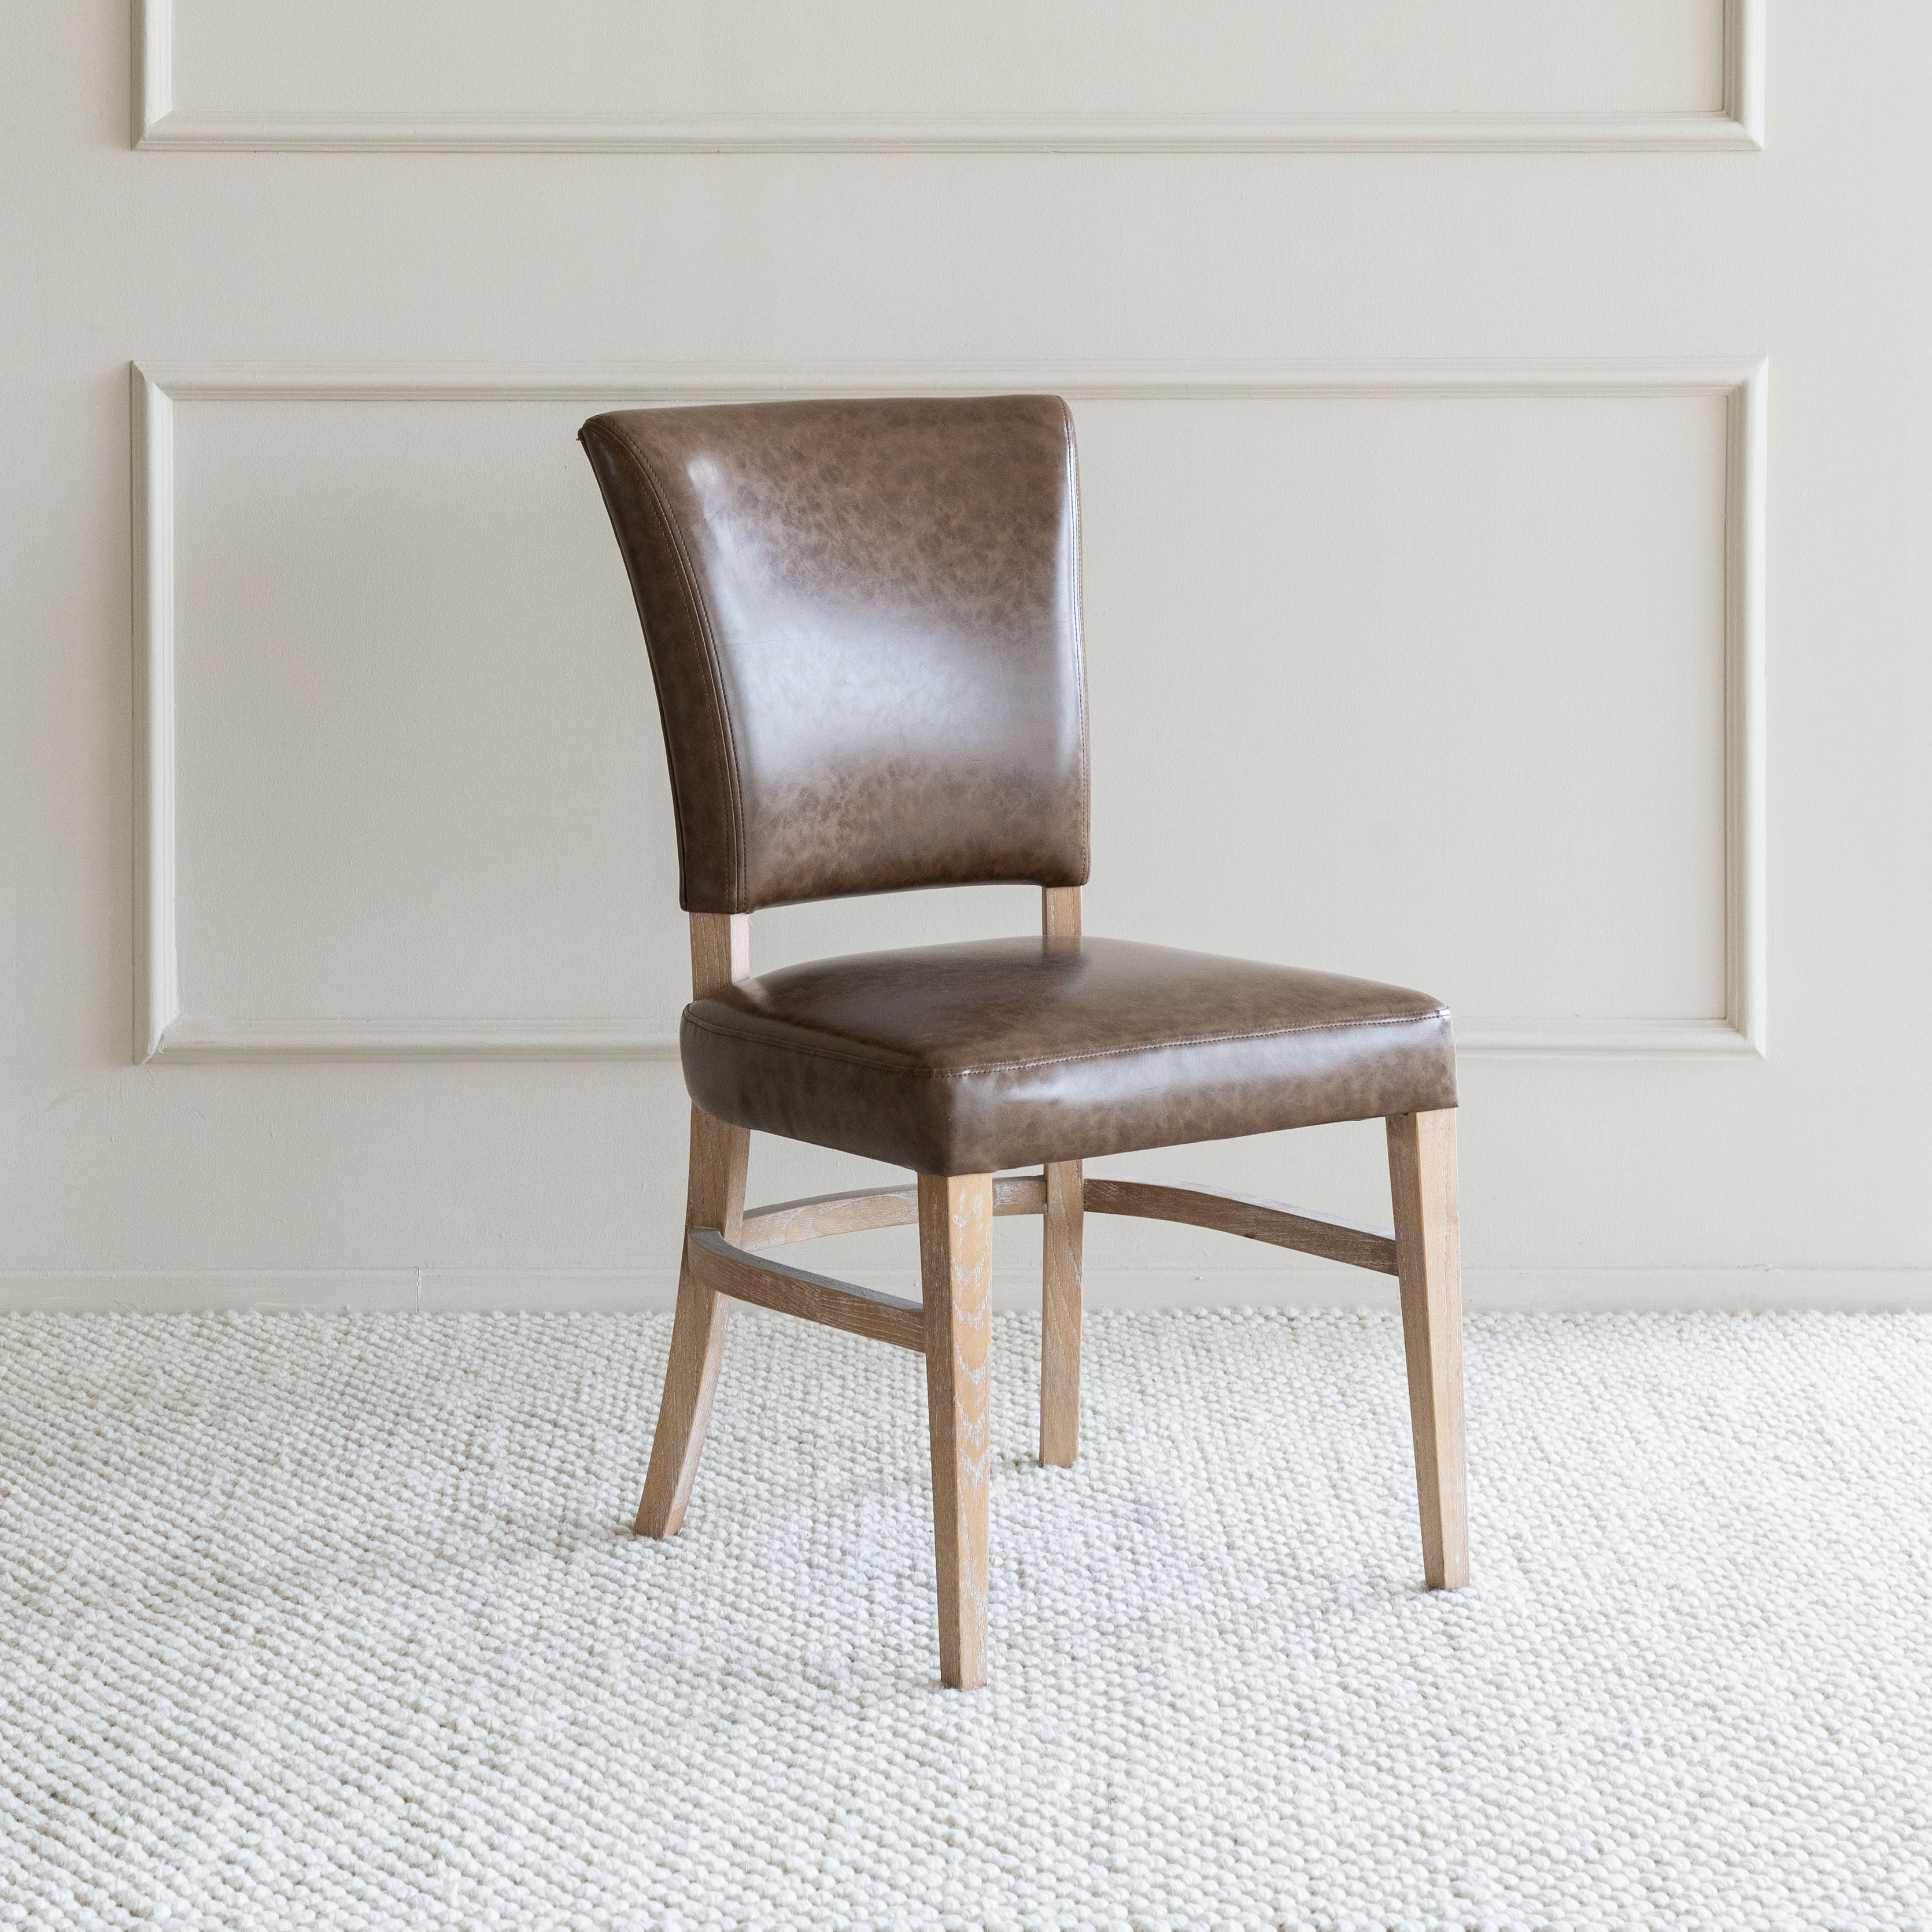 Lana Chair (LJ1041) - Wood and Steel Furnitures